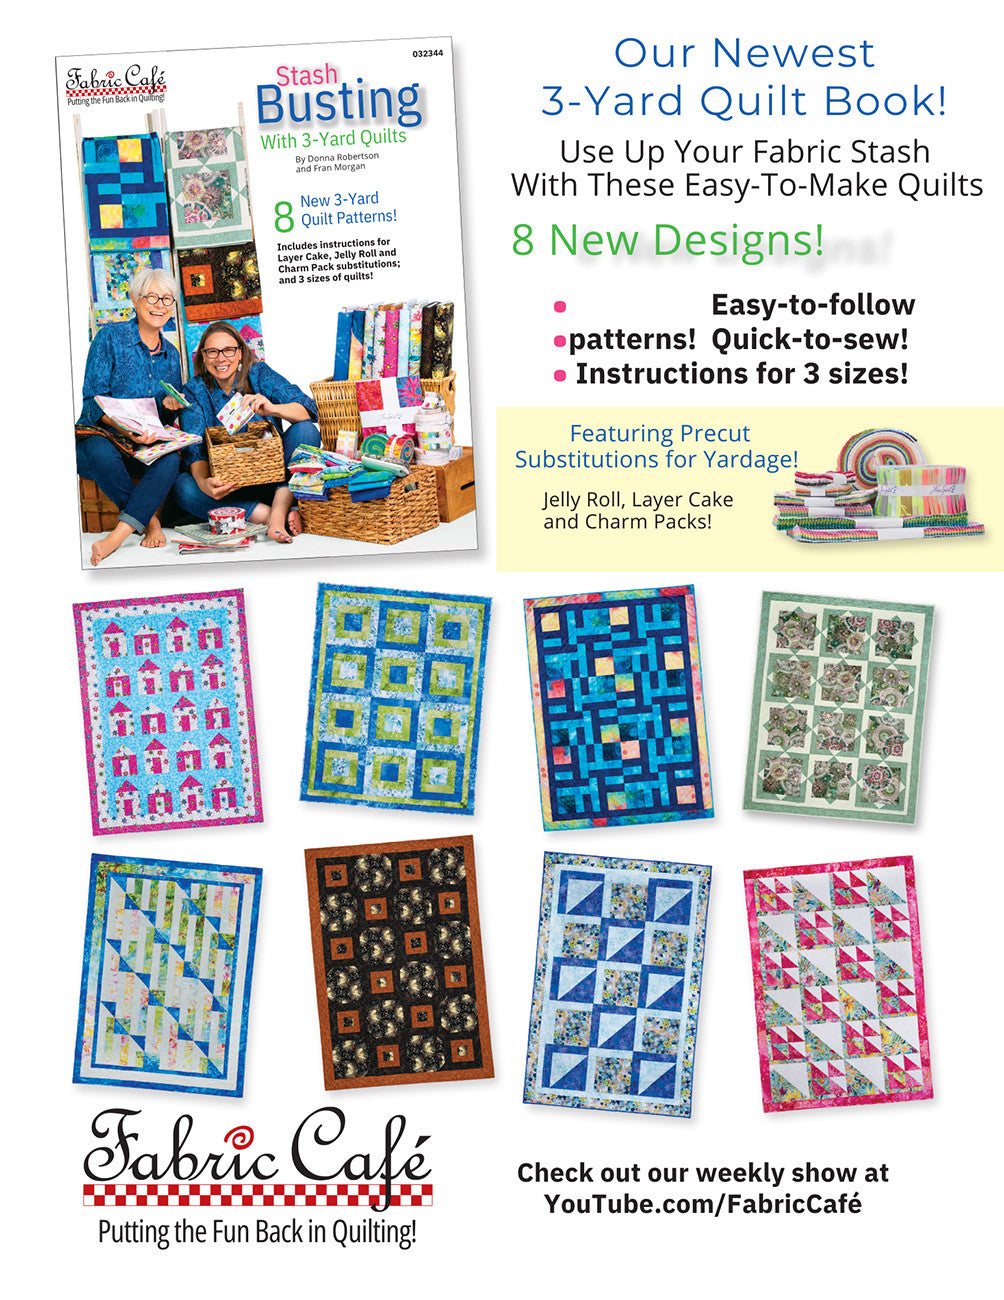 Easy Ripple – Making Scrap Quilts from Stash